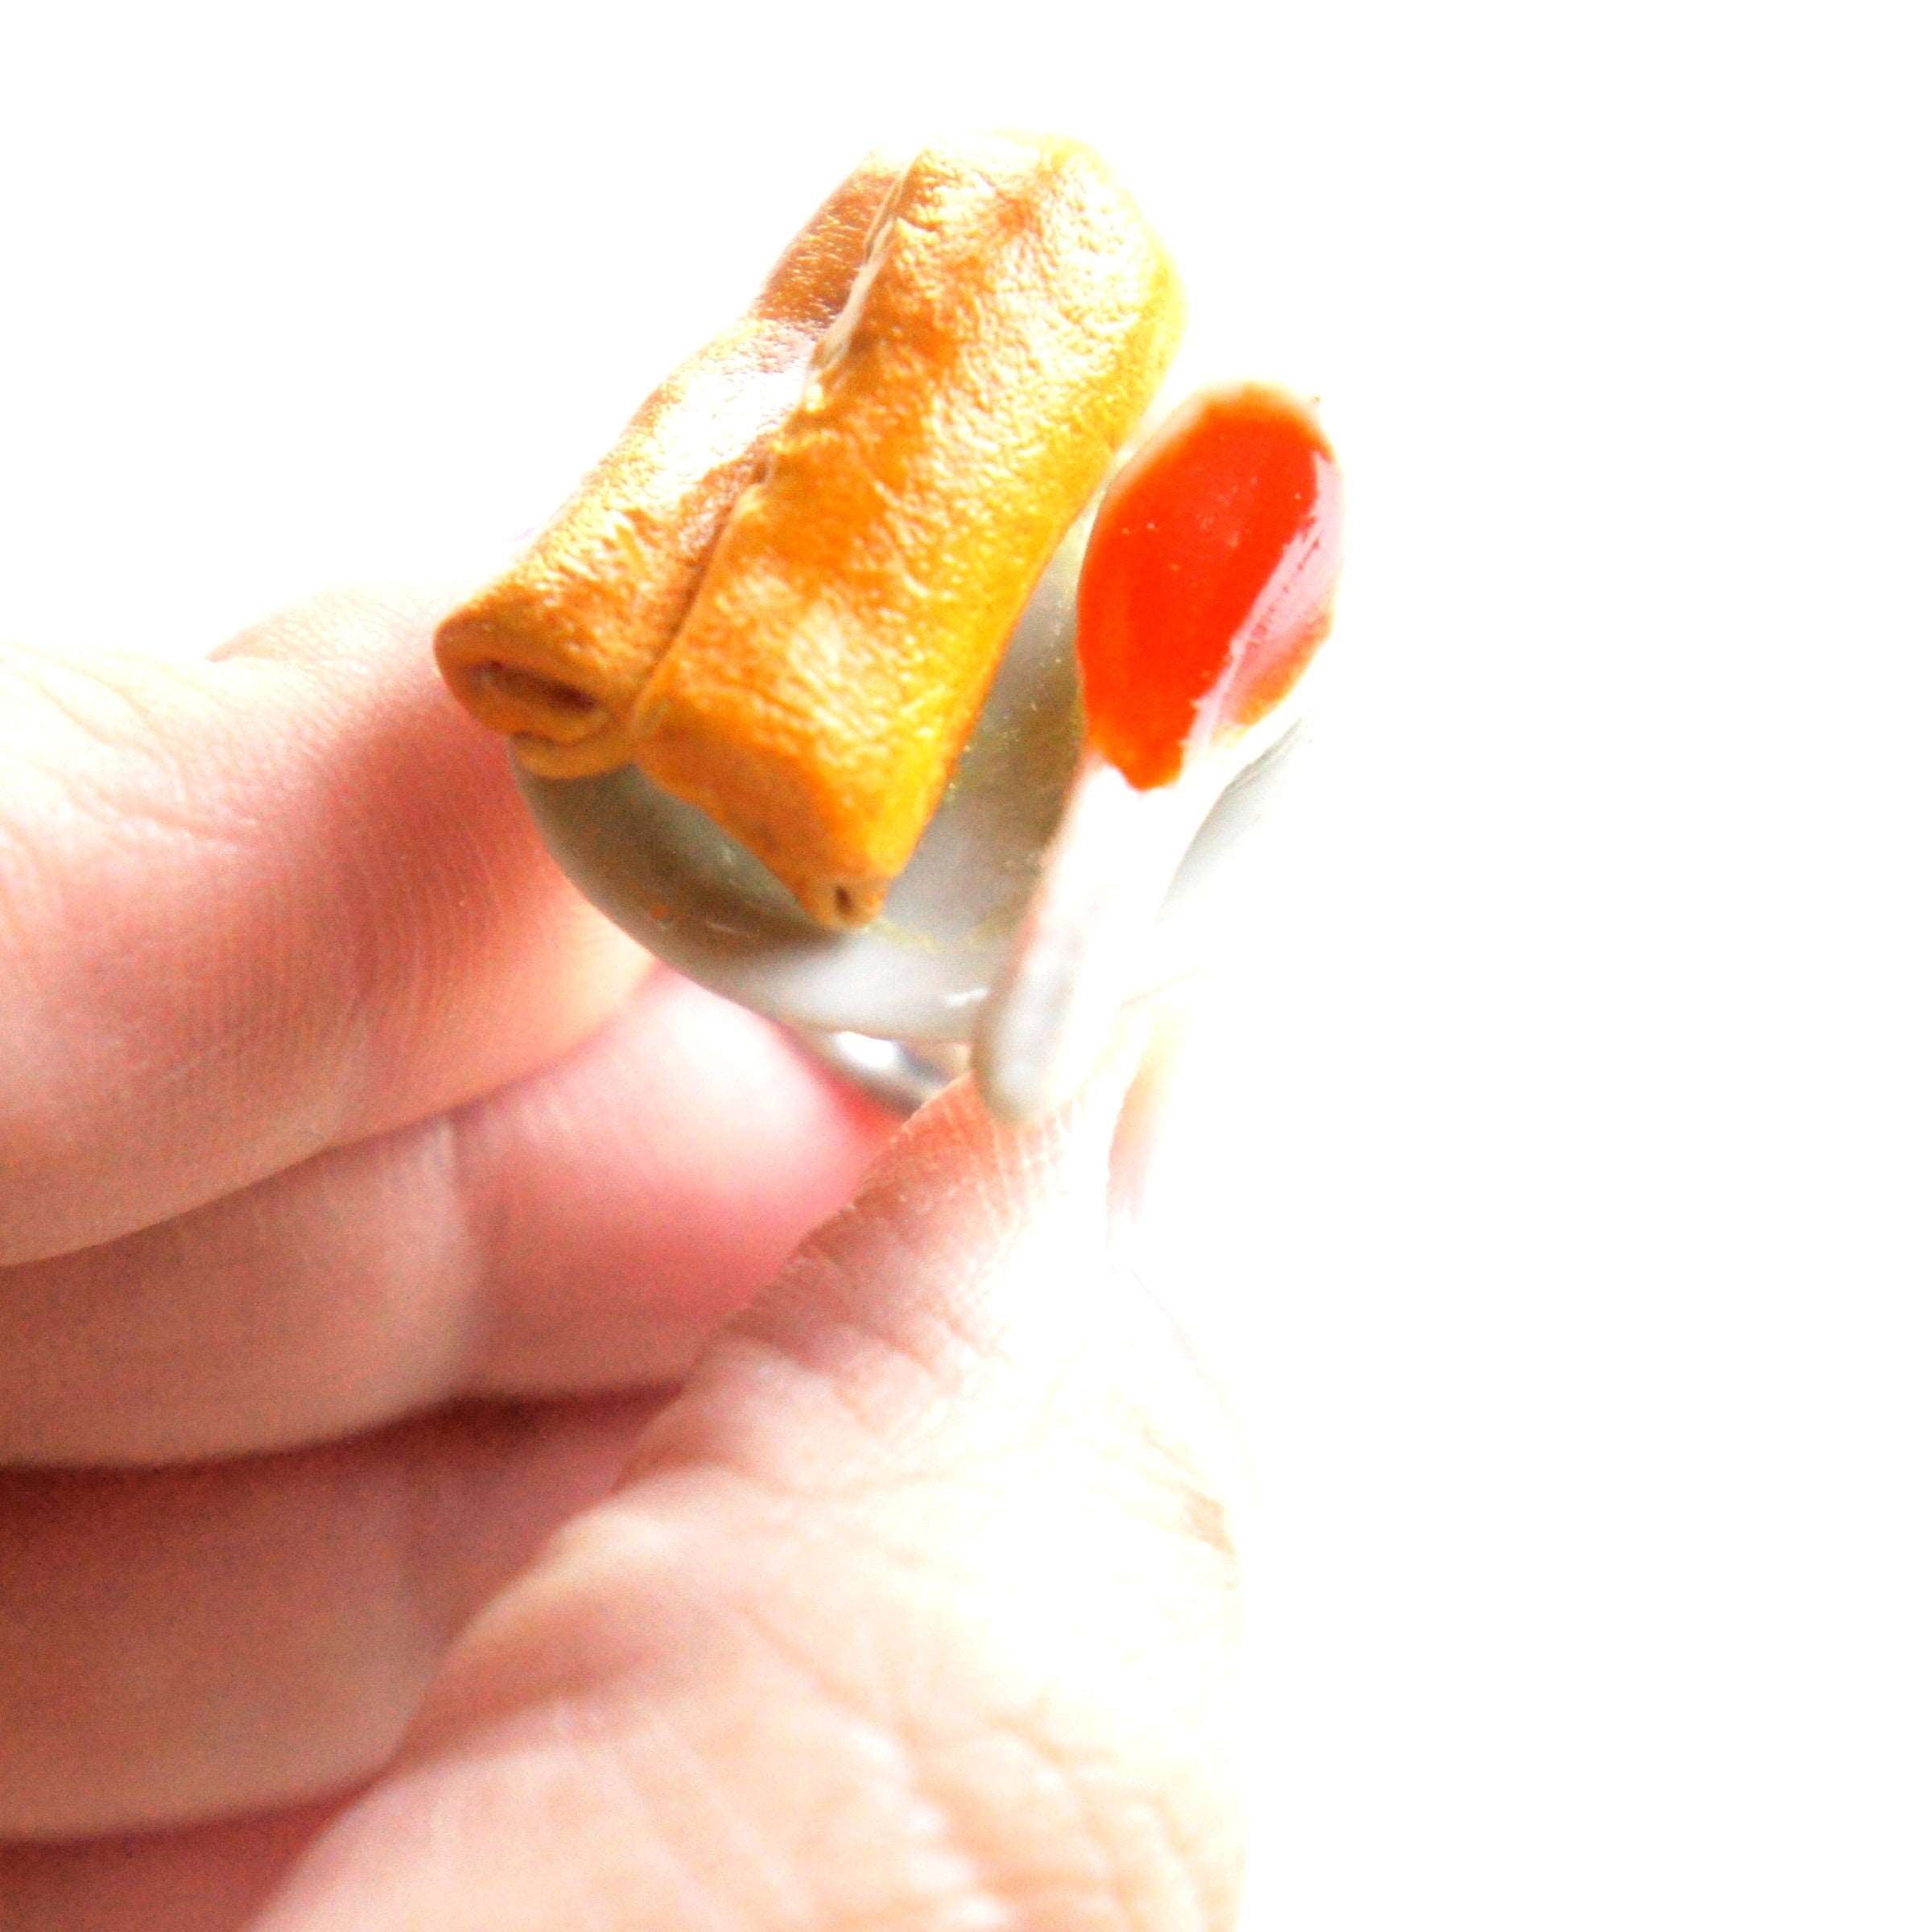 Egg Rolls Ring - Jillicious charms and accessories